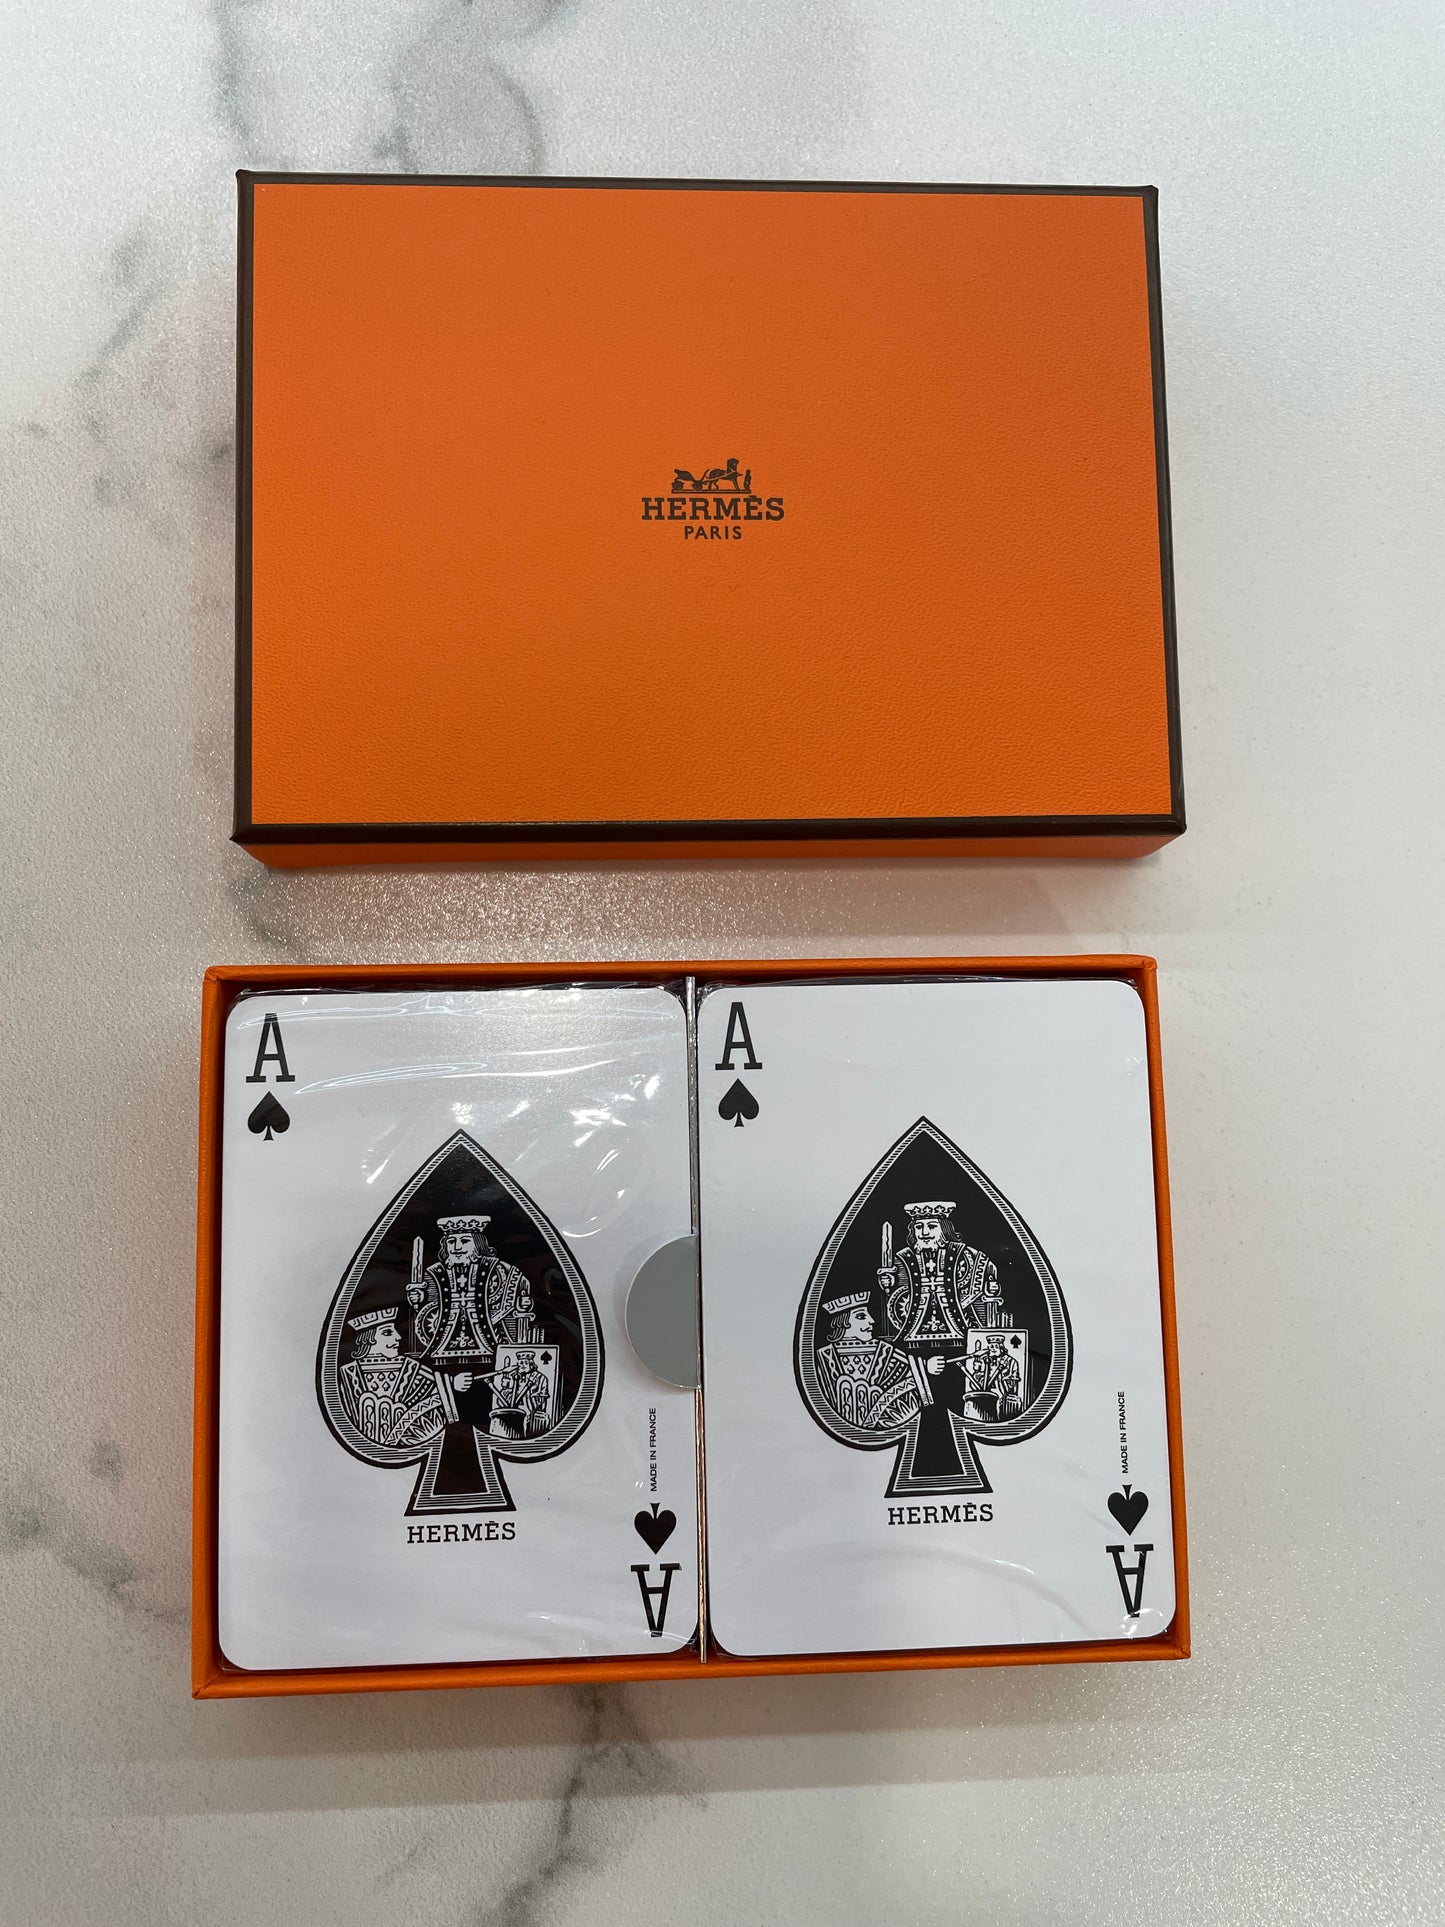 Hermes Set of 2 Cheval de Fete poker playing cards